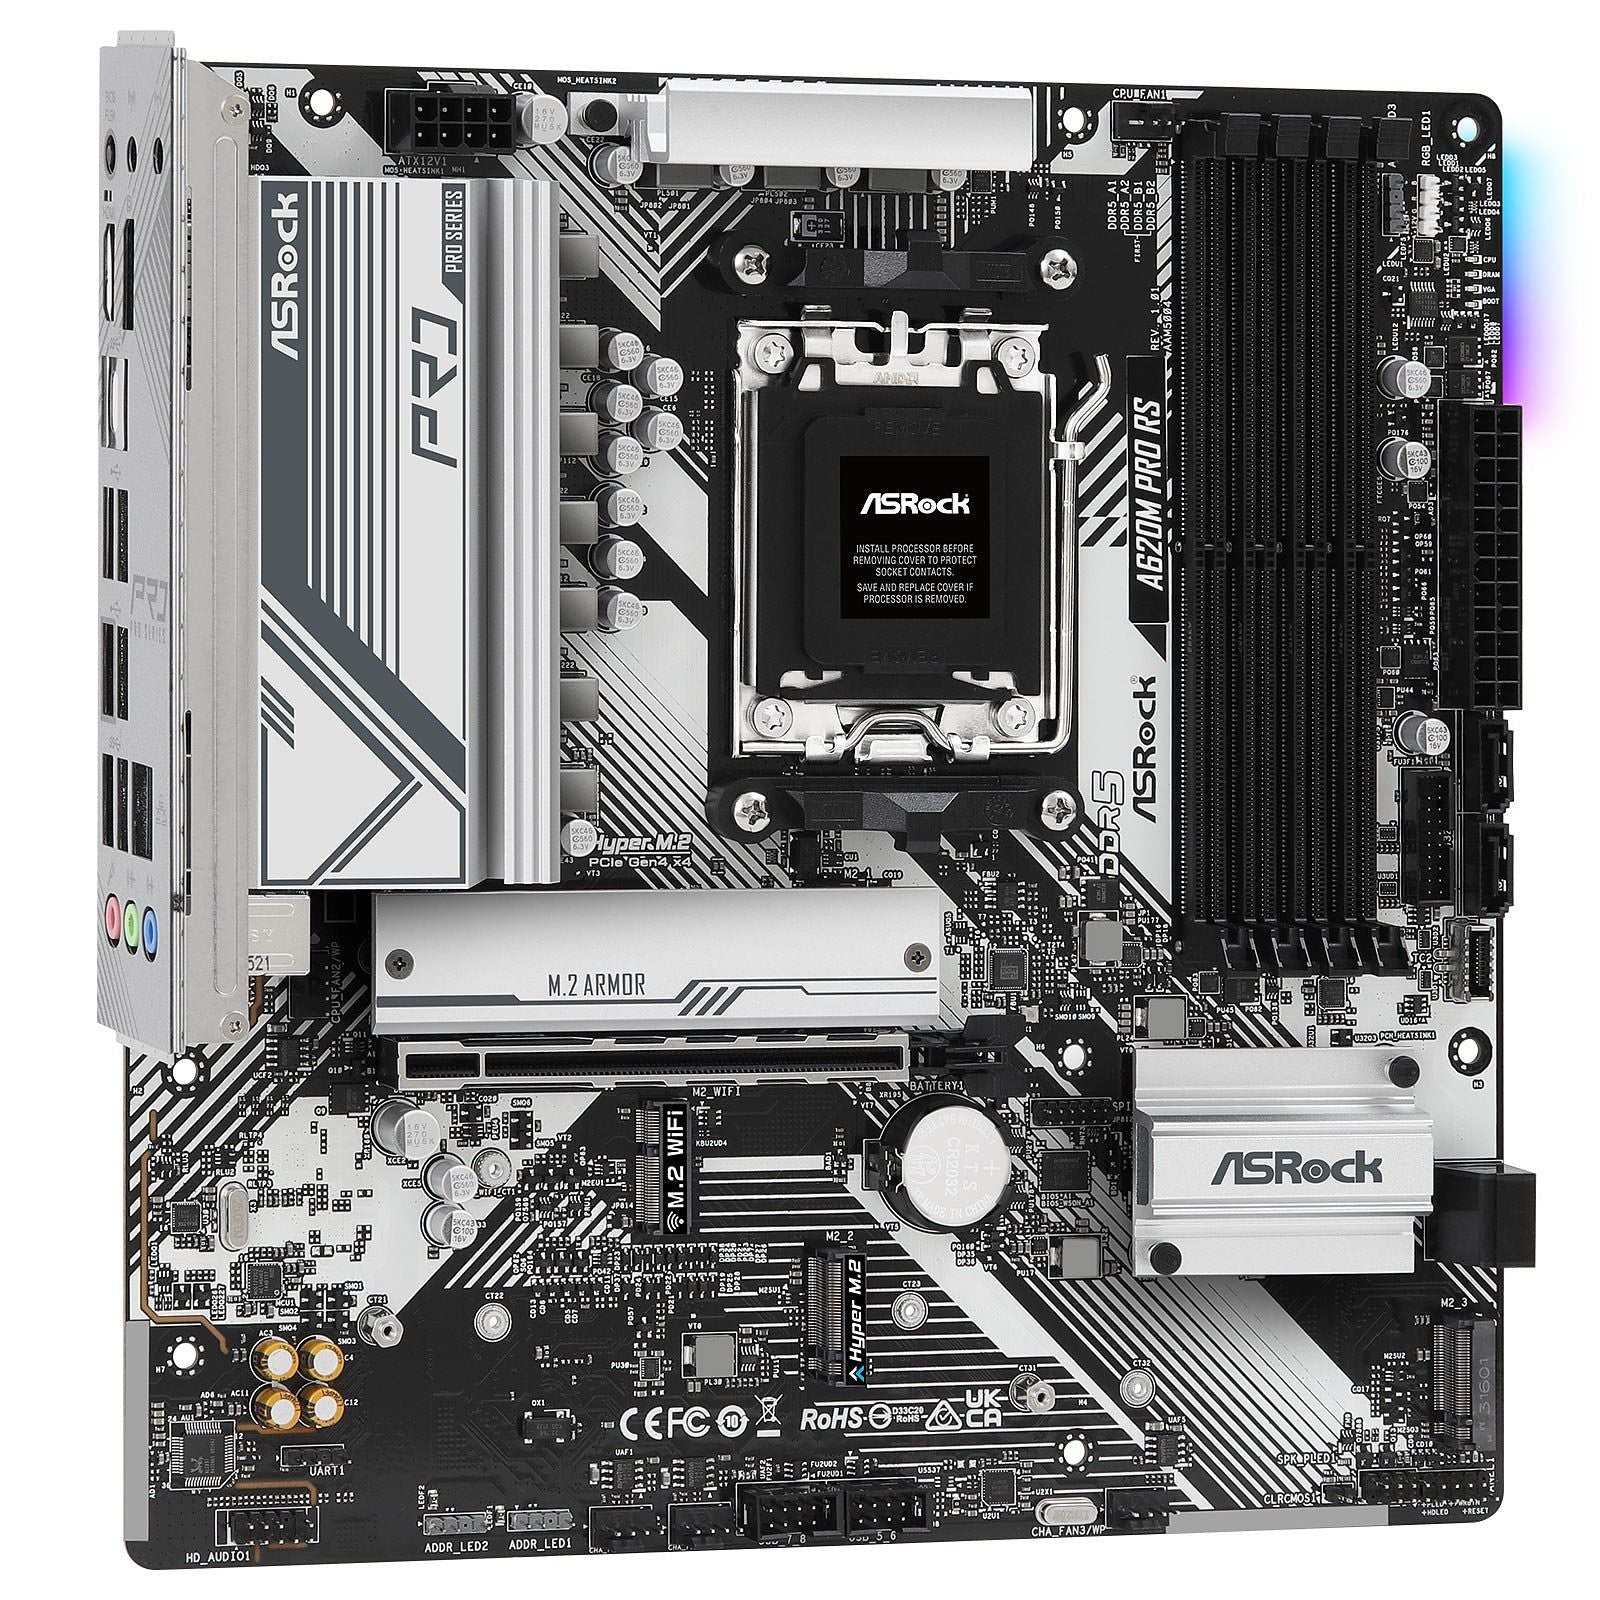 ASRock A620M Pro RS - OVERCLOCK Computer